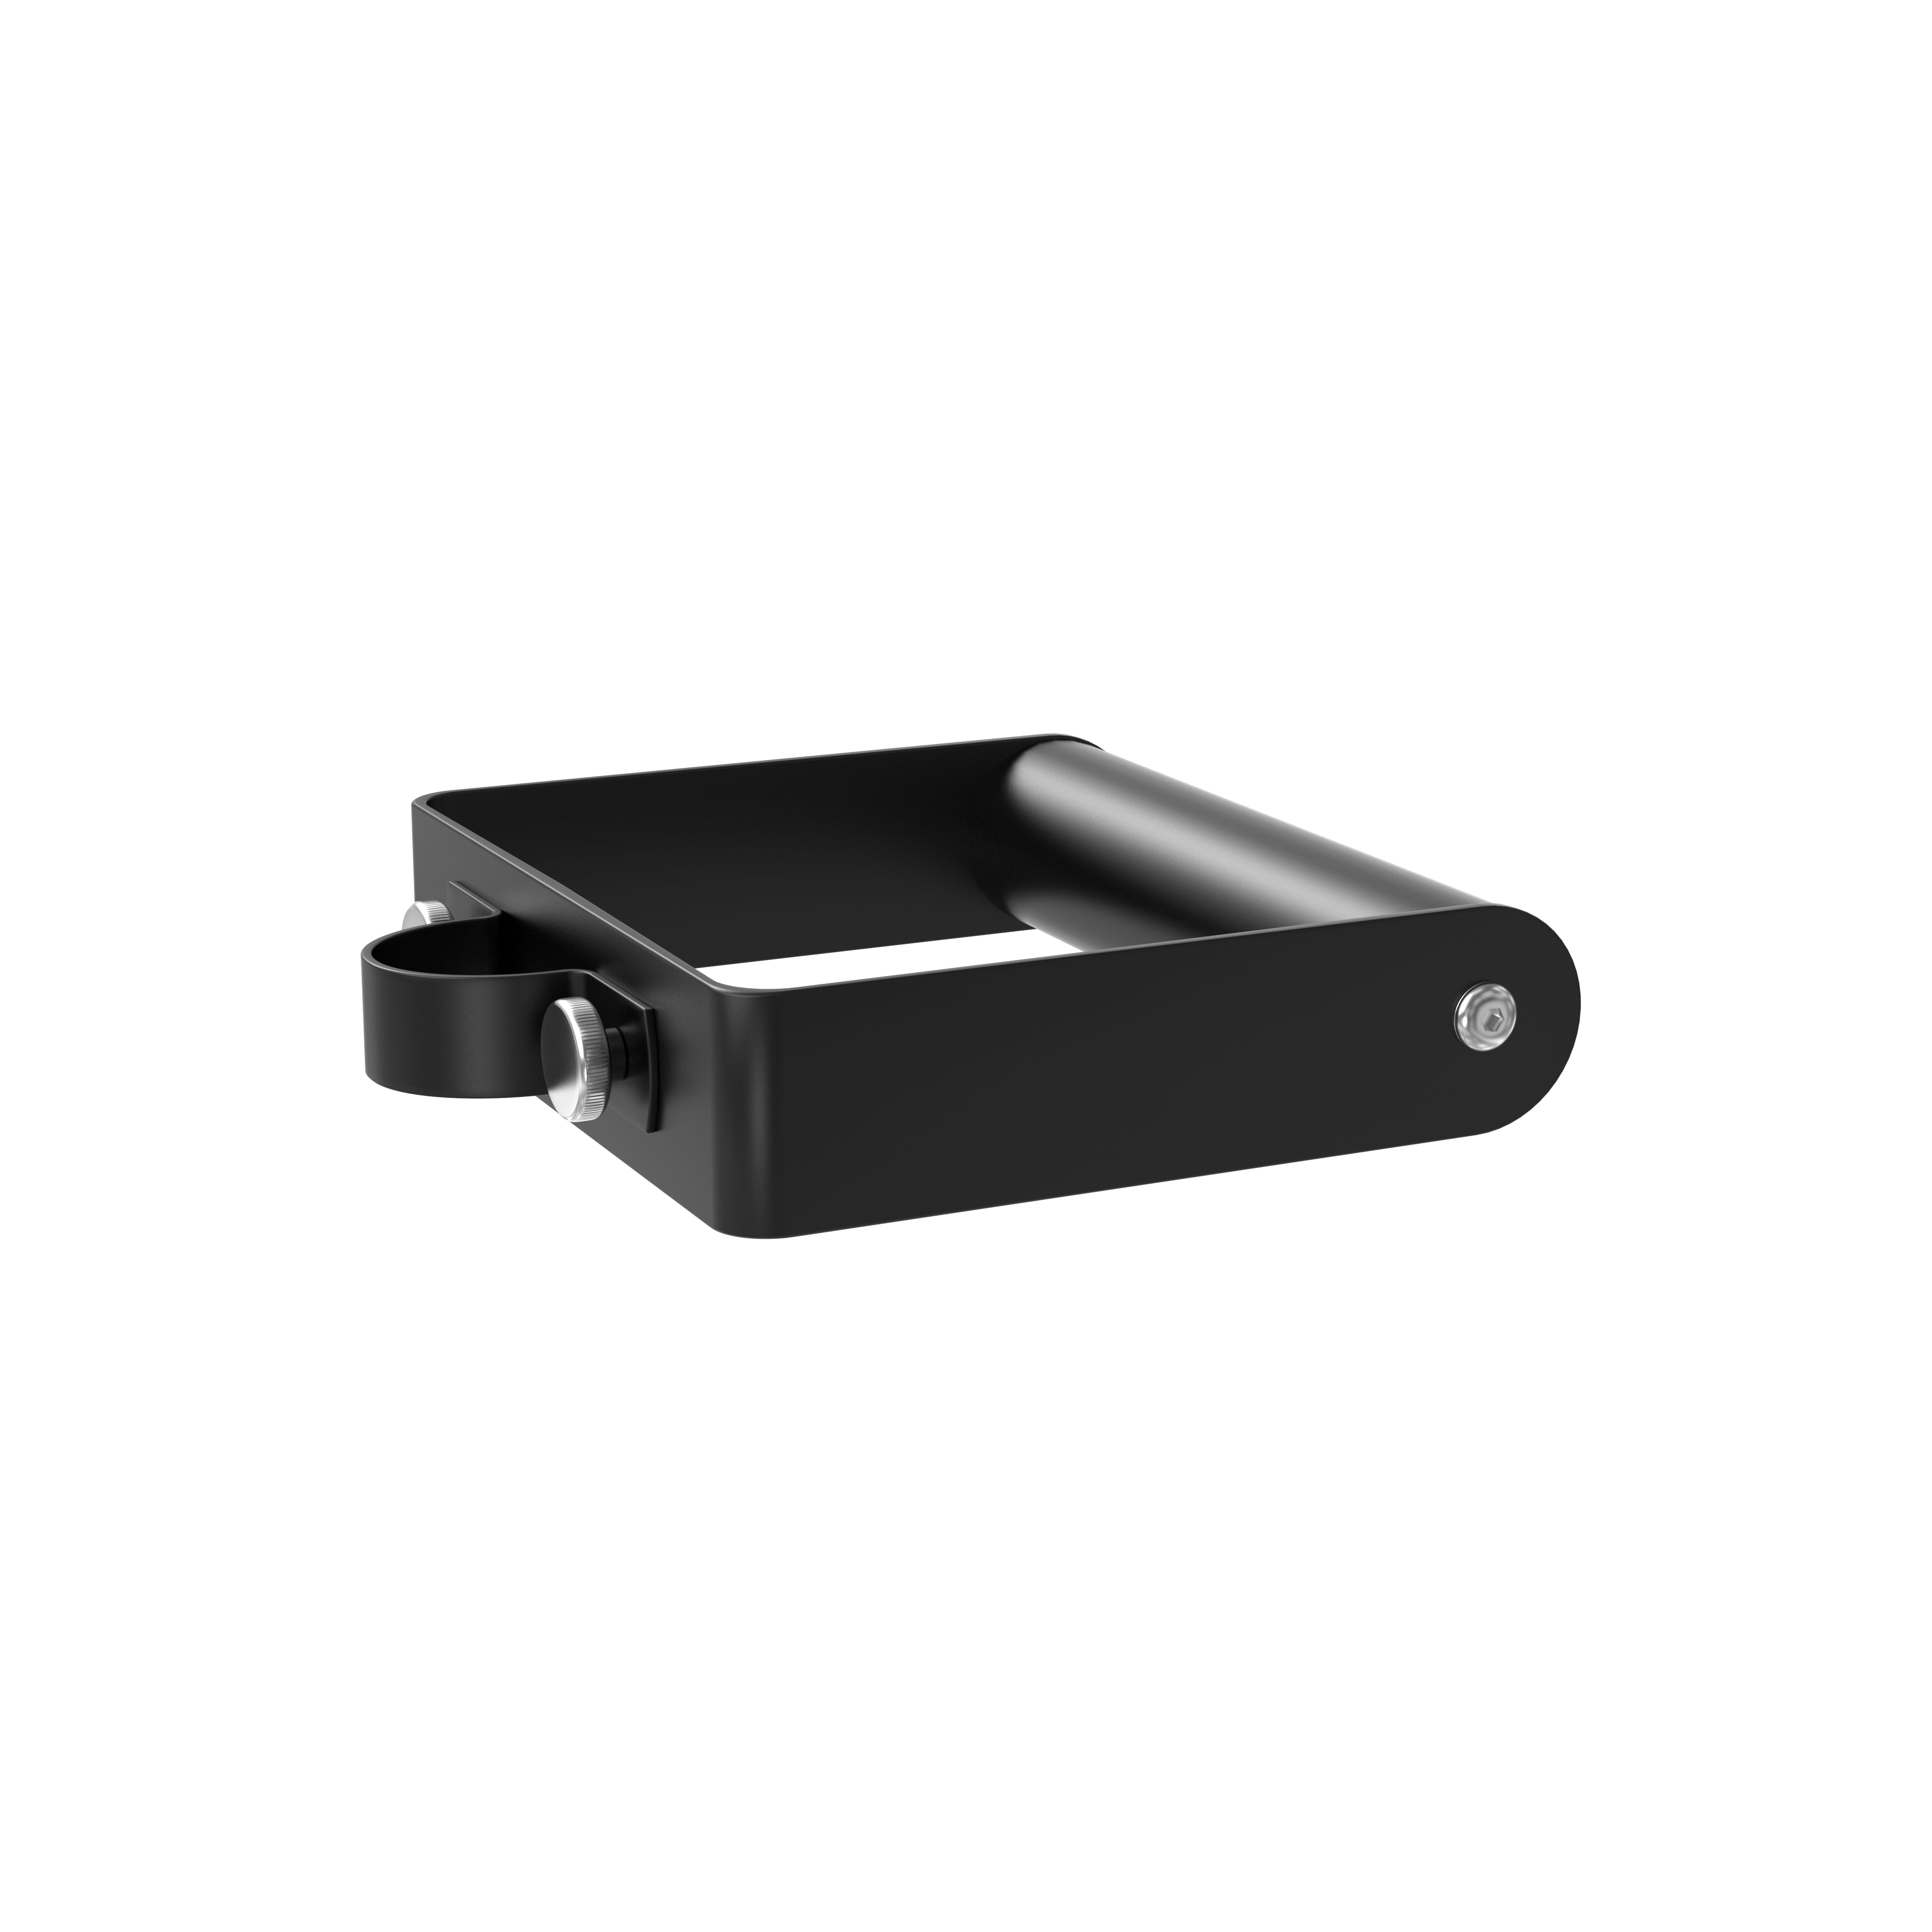 Add-On Handle for Rolling Floor Stand (Black)